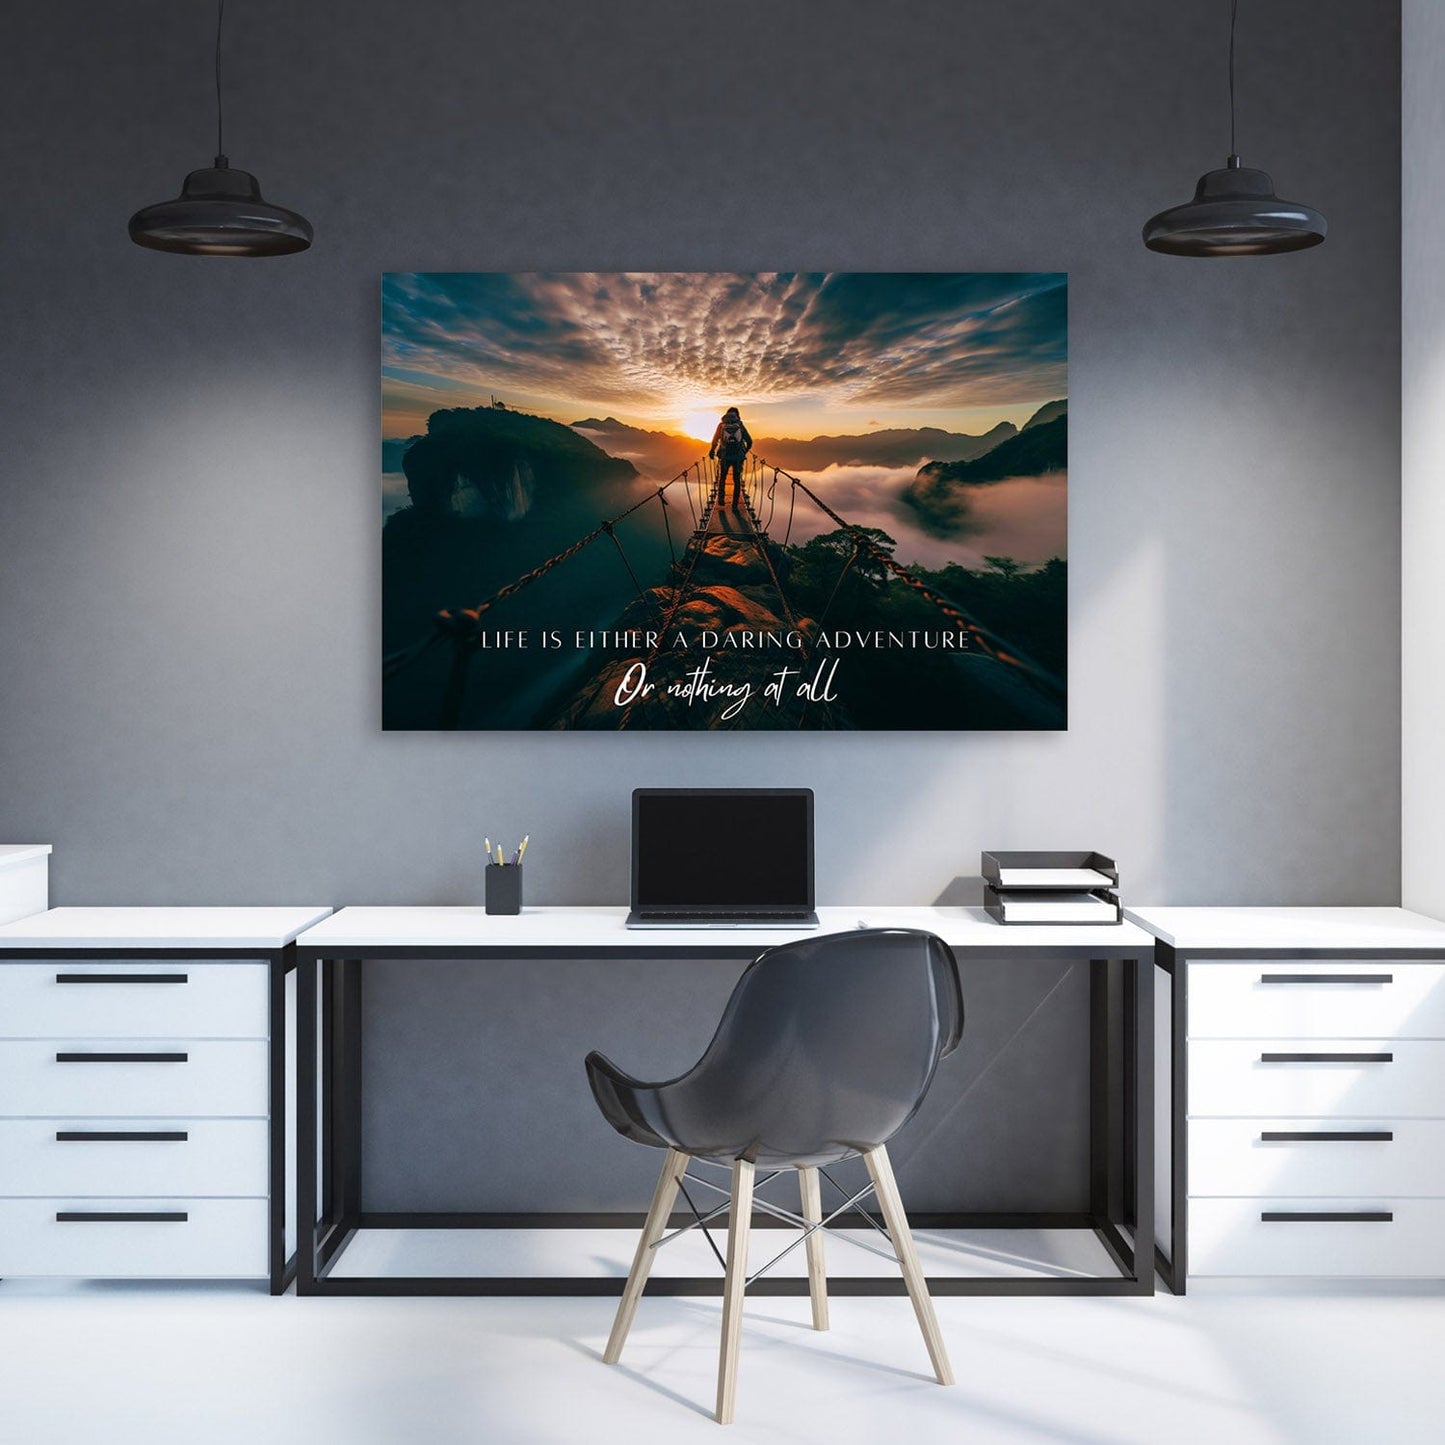 Life is either a daring adventure or nothing at all - Helen Keller Quote Wall Art | Inspirational Wall Art Motivational Wall Art Quotes Office Art | ImpaktMaker Exclusive Canvas Art Landscape